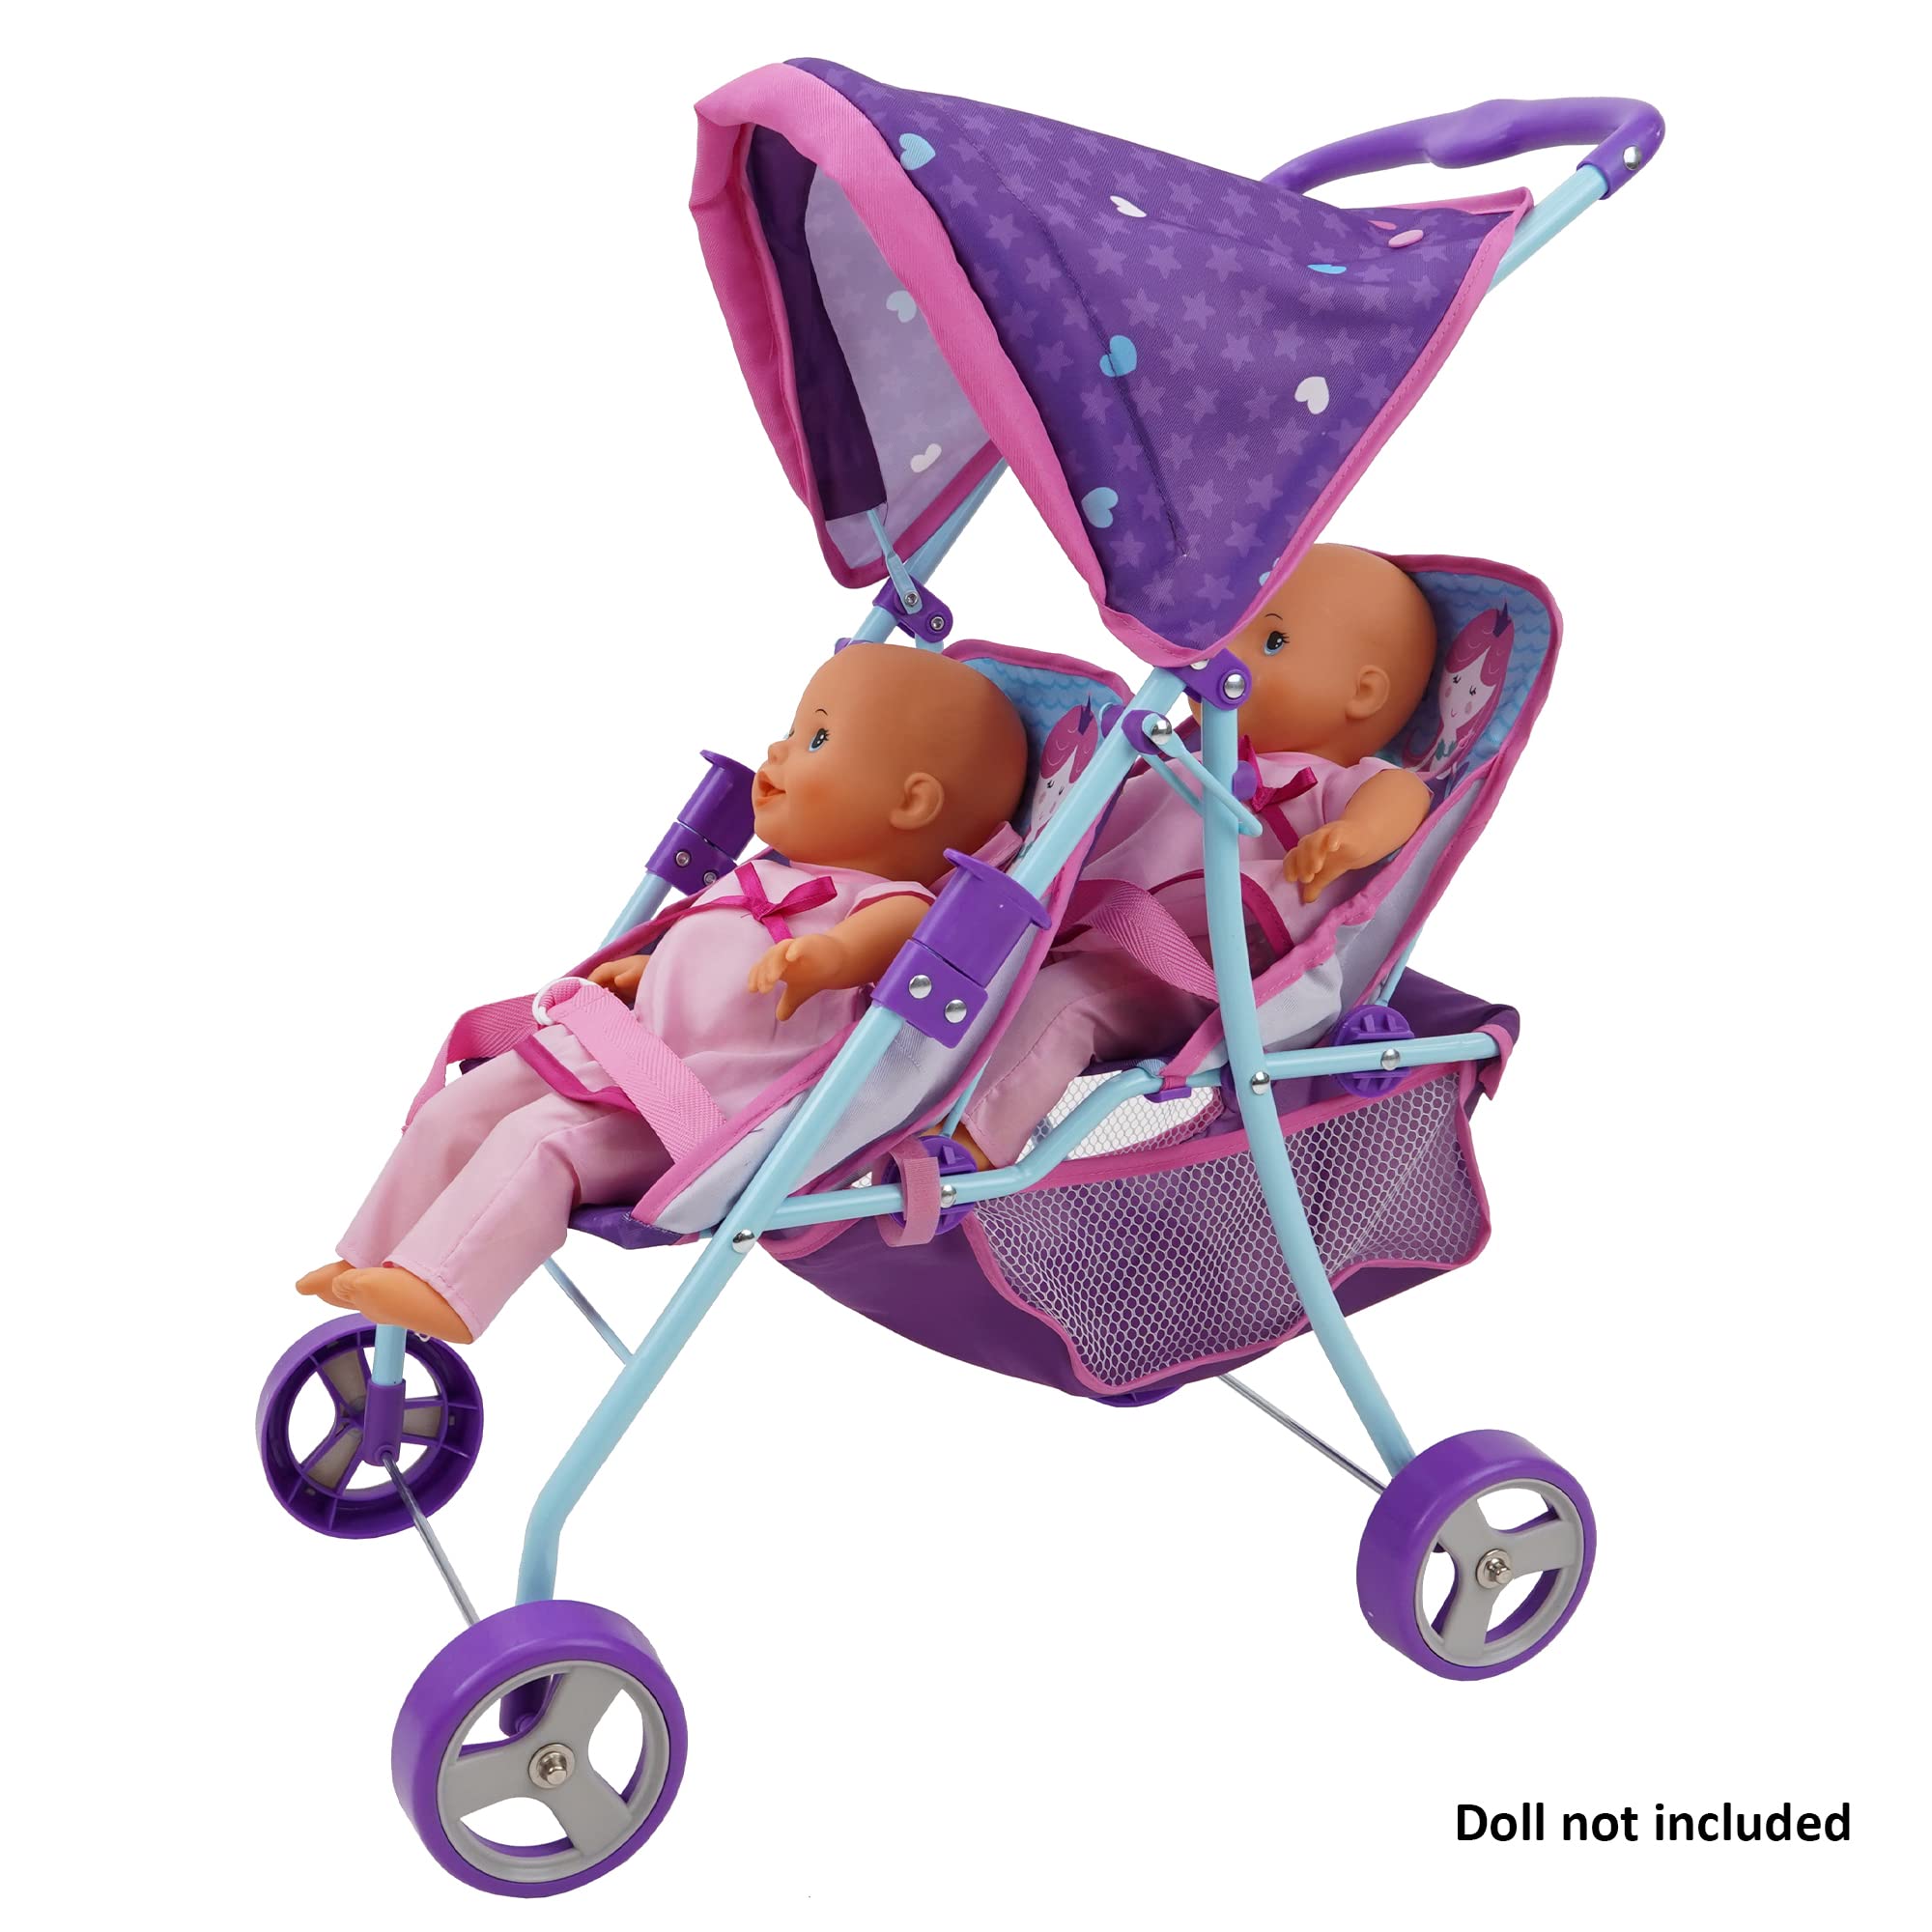 509 Crew Mermaid Twin Doll Stroller - Kids Pretend Play, Retractable Canopy, Easy to Fold for Storage & Travel, 2 Seats, Fits Dolls up to 18'', Ages 3+